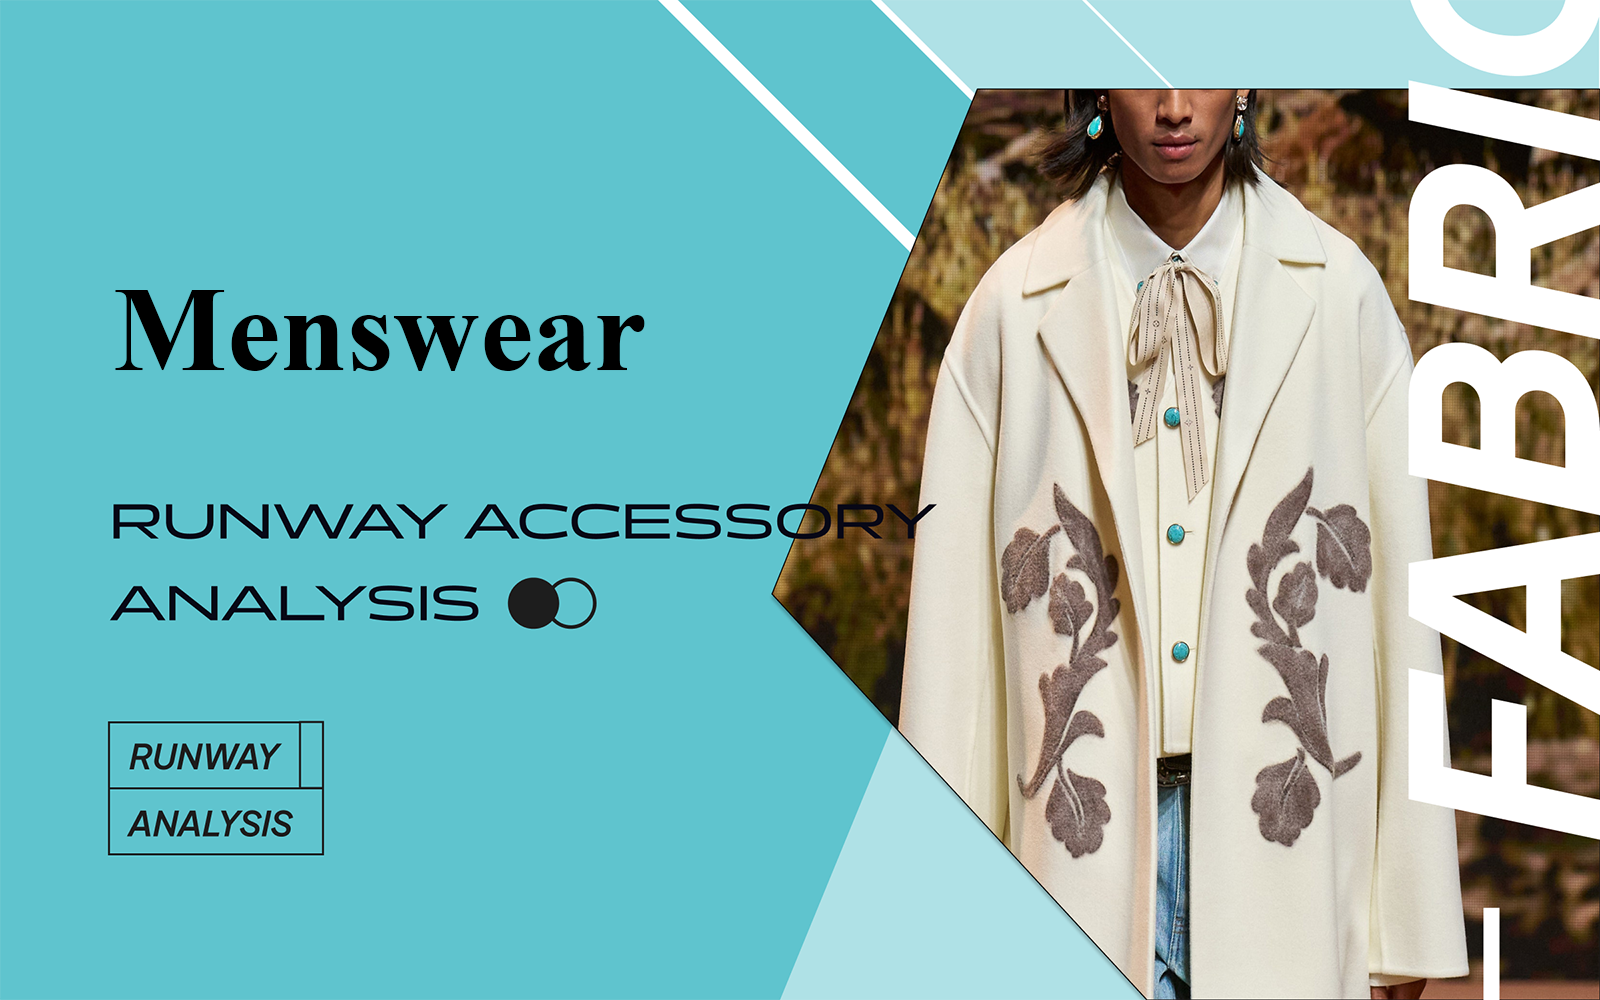 Accessory -- The Comprehensive Analysis of Menswear Runway